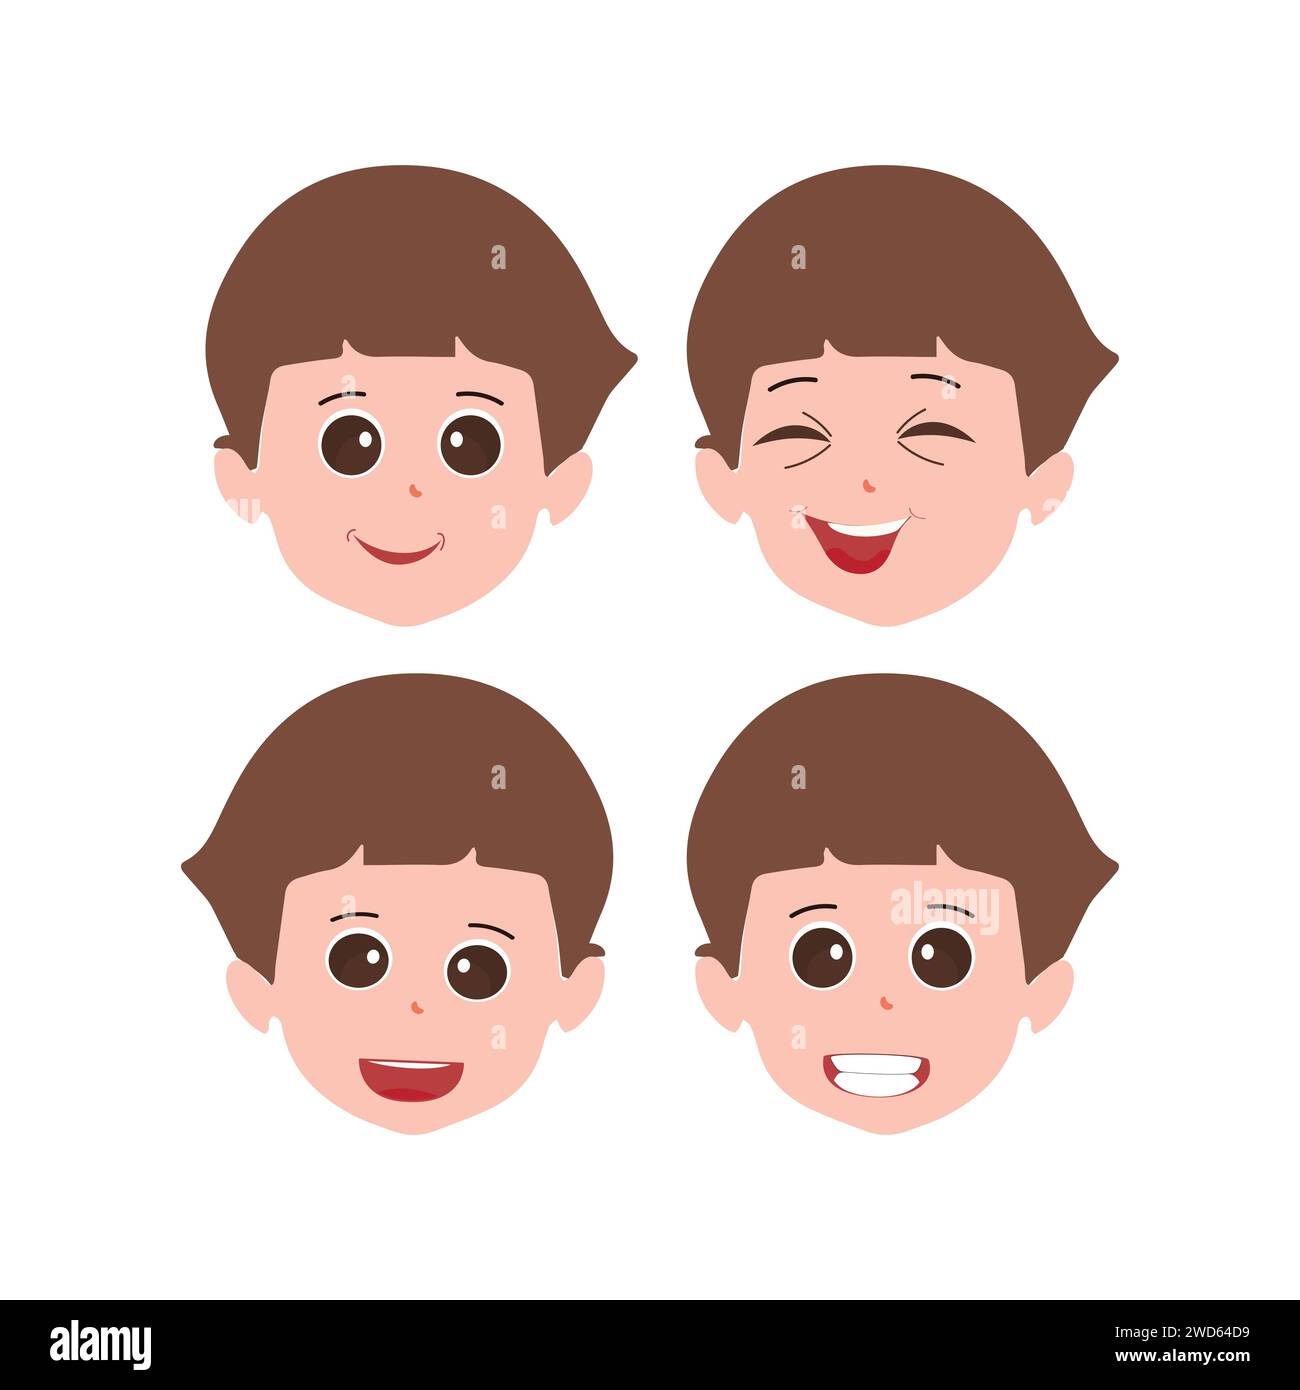 Cute little boy facial expressions. Vector of kid faces illustration with different emotions such as happy, smiling, laughing, winking, angry, confuse Stock Vector